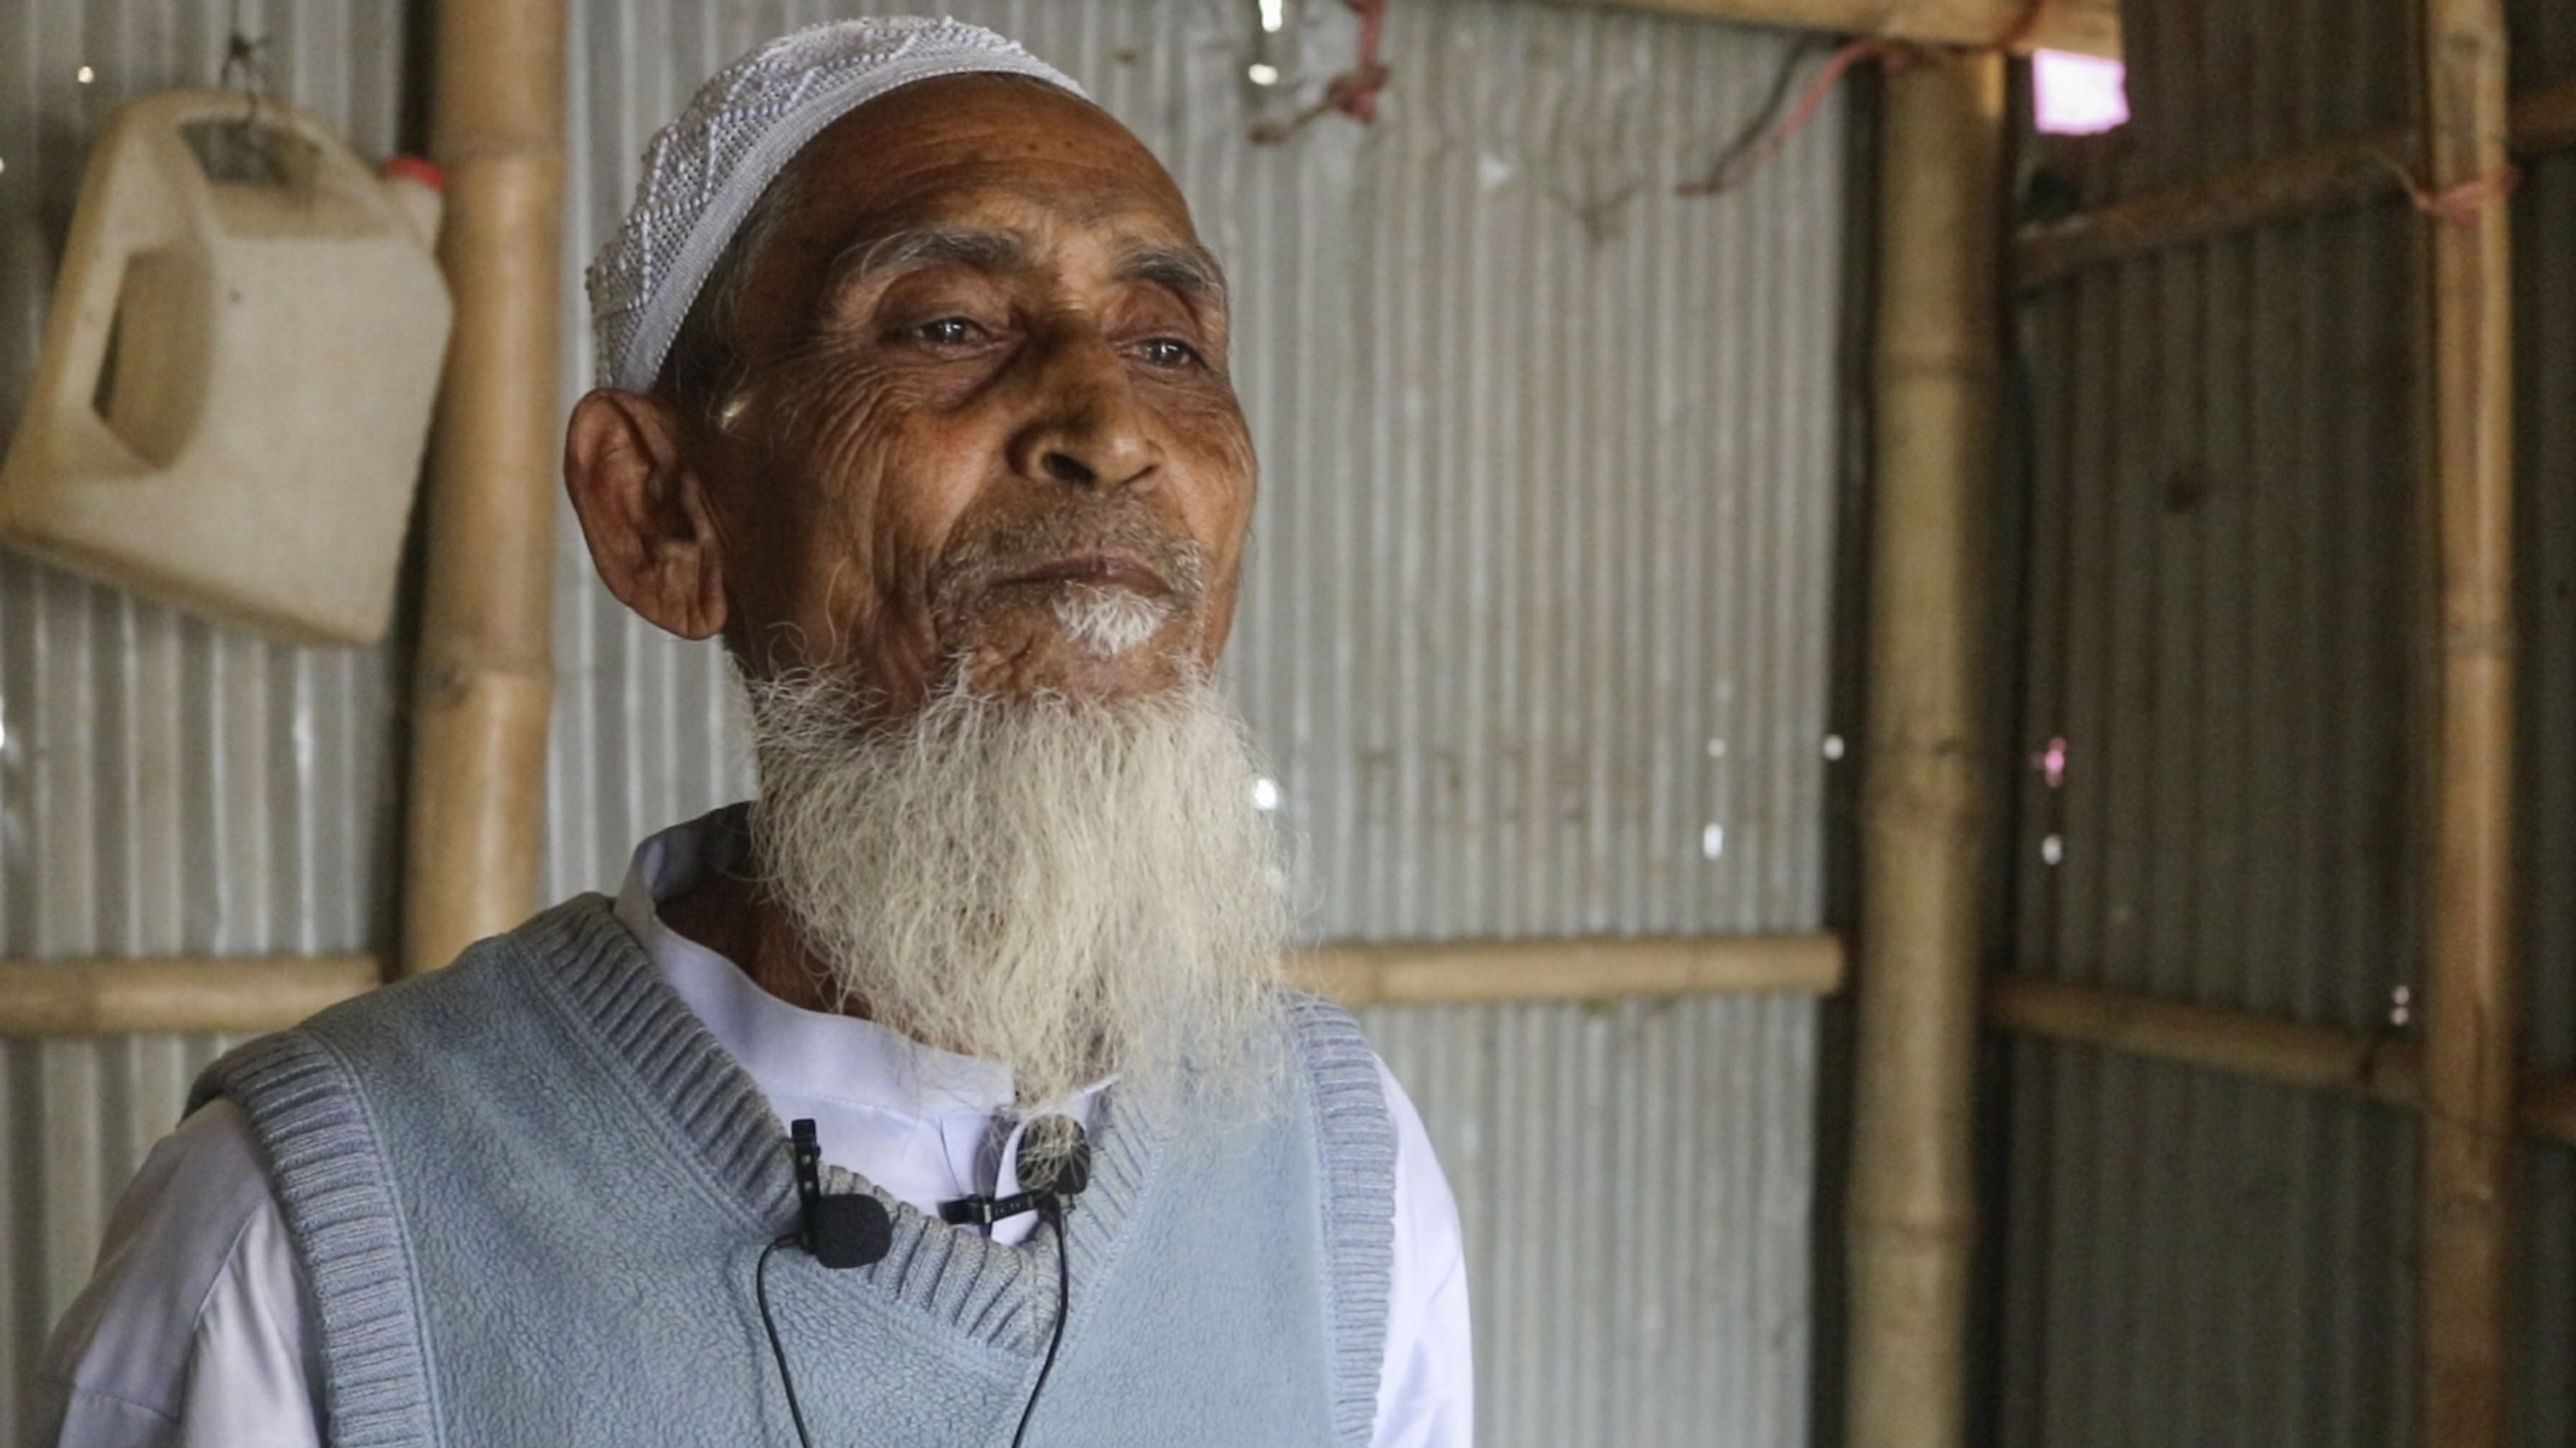 Rohingya refugees are afraid to return to Myanmar after the coup